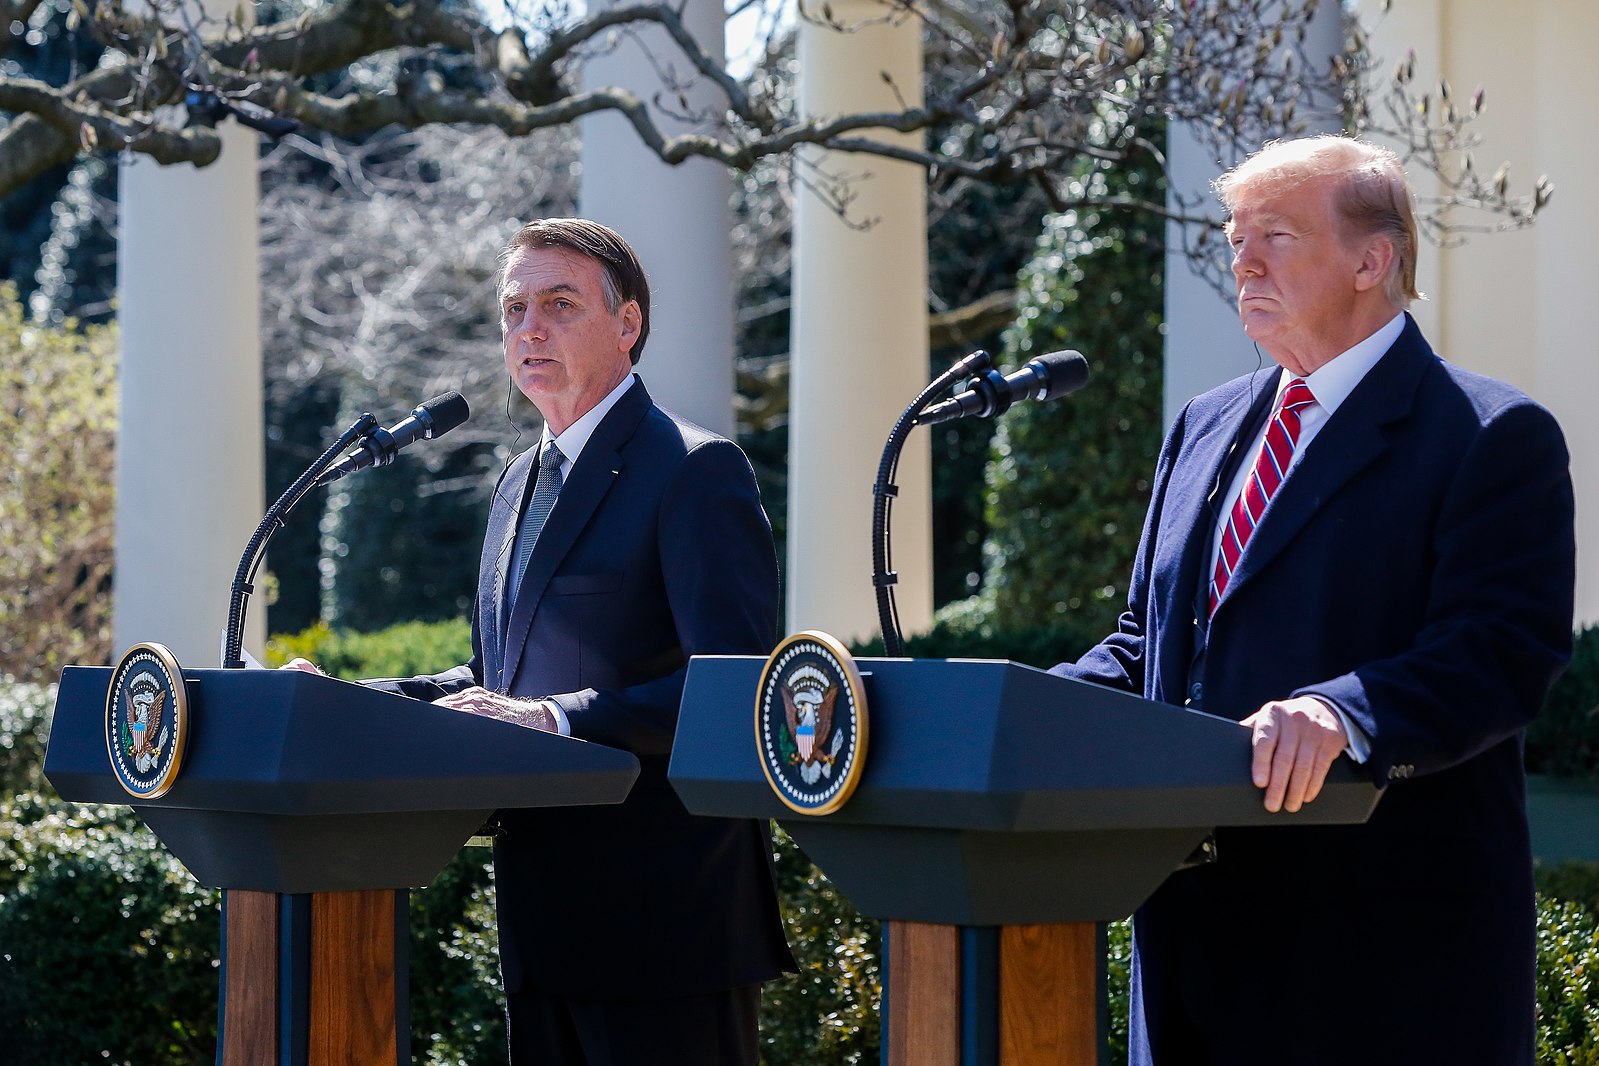 Brazilian President Jair Bolsonaro meets with Donald Trump at the White House in 2019.